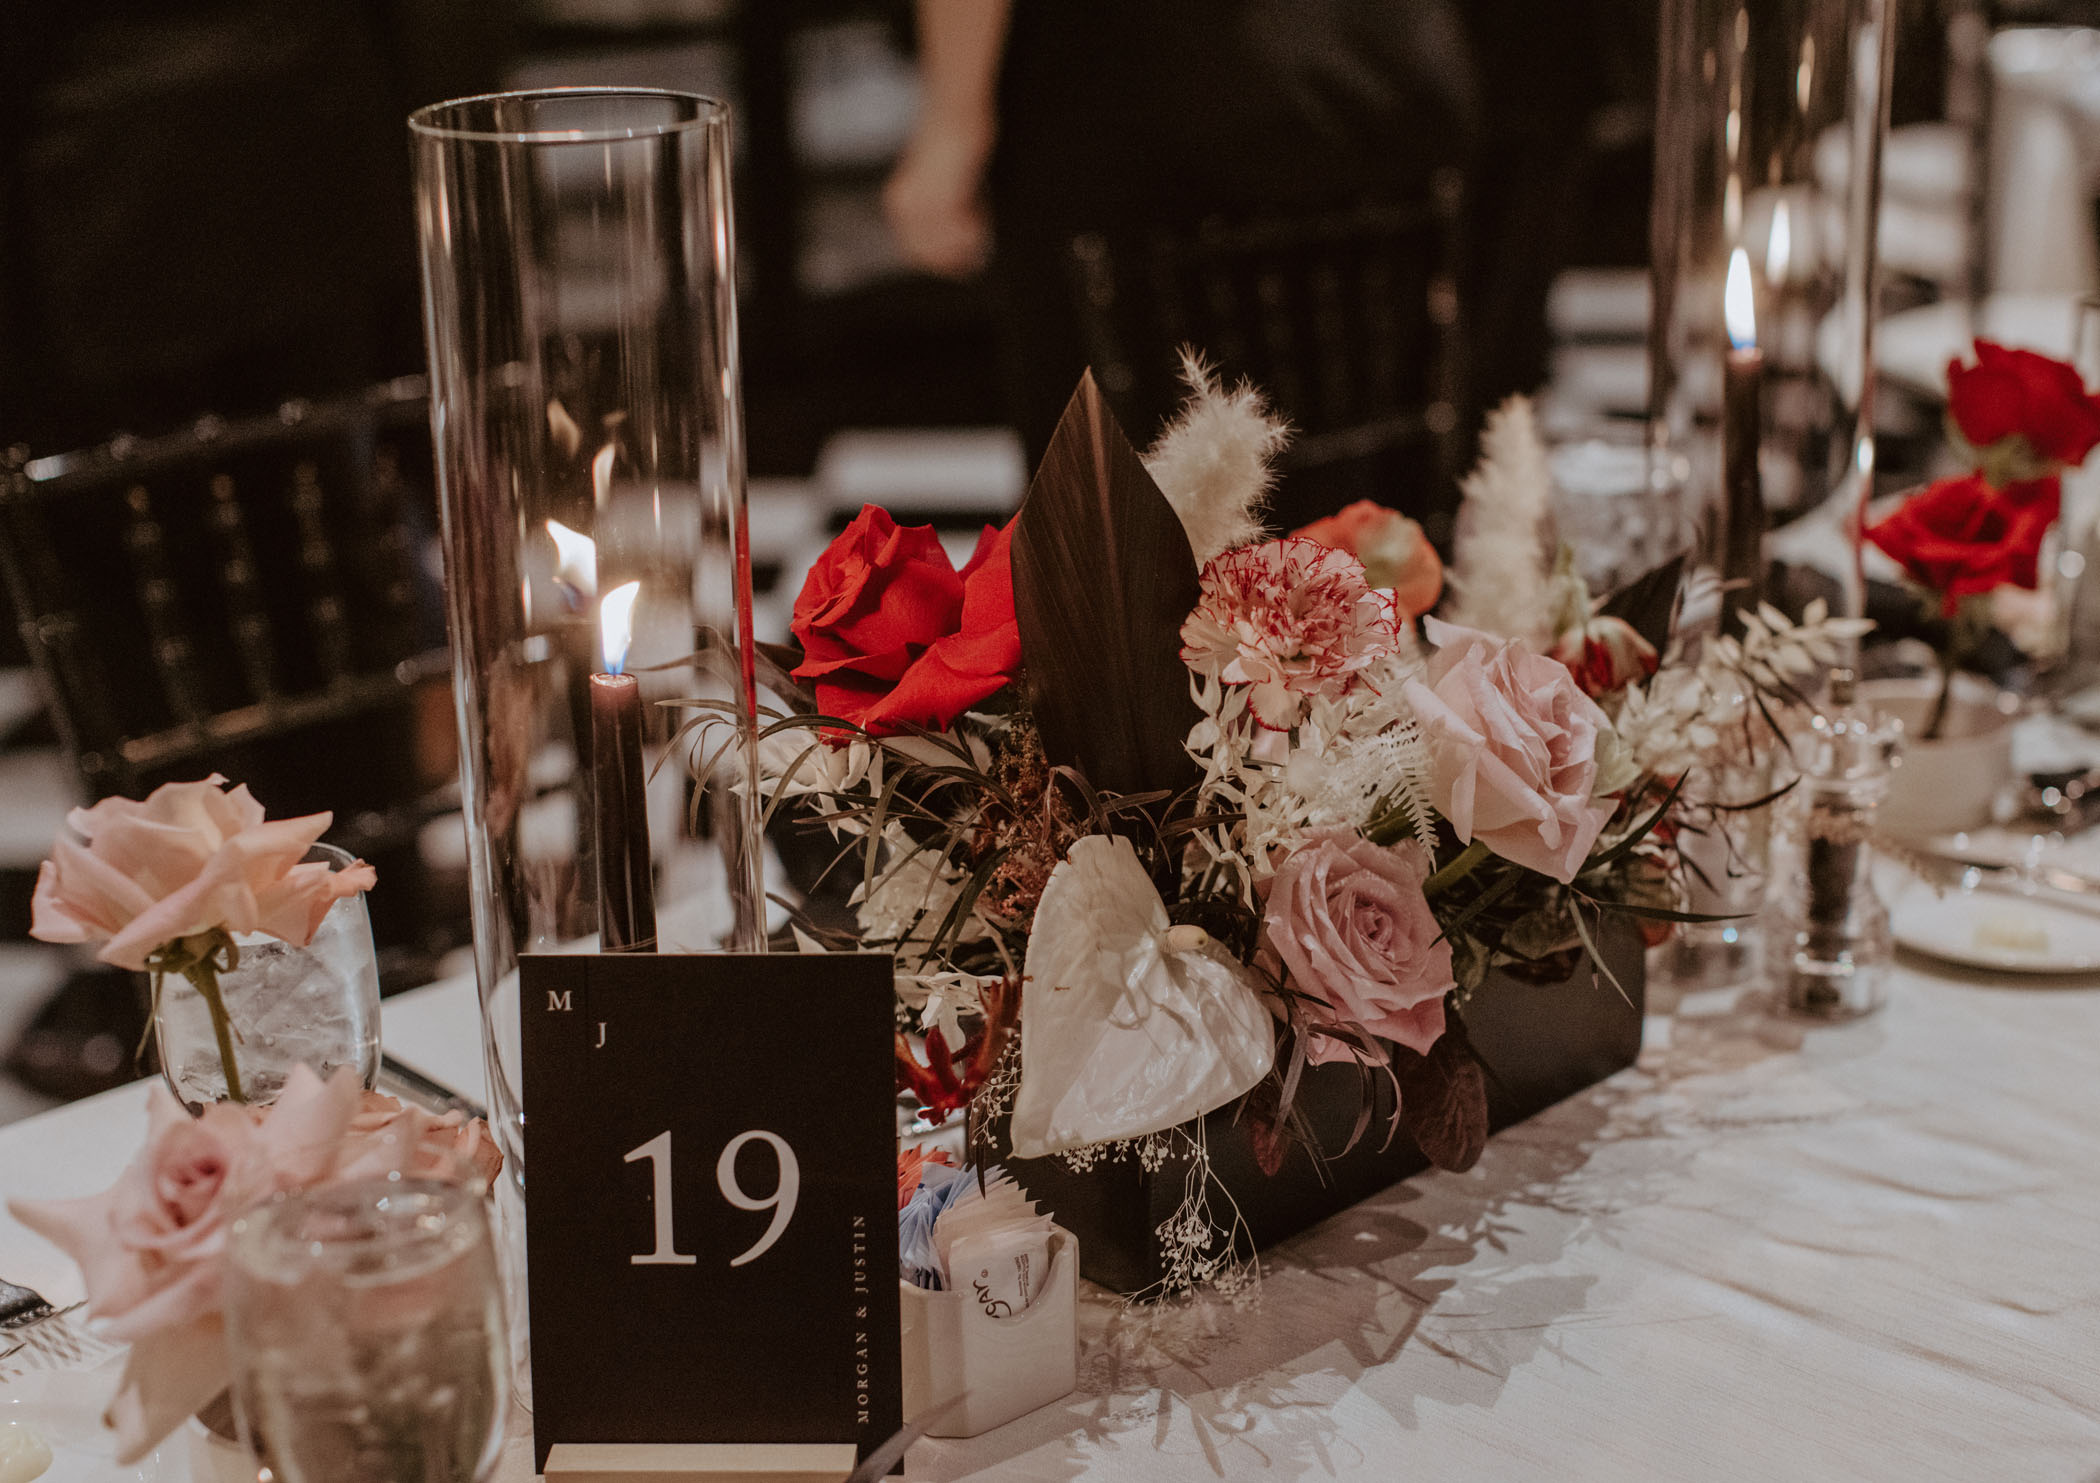 Black and red wedding reception table